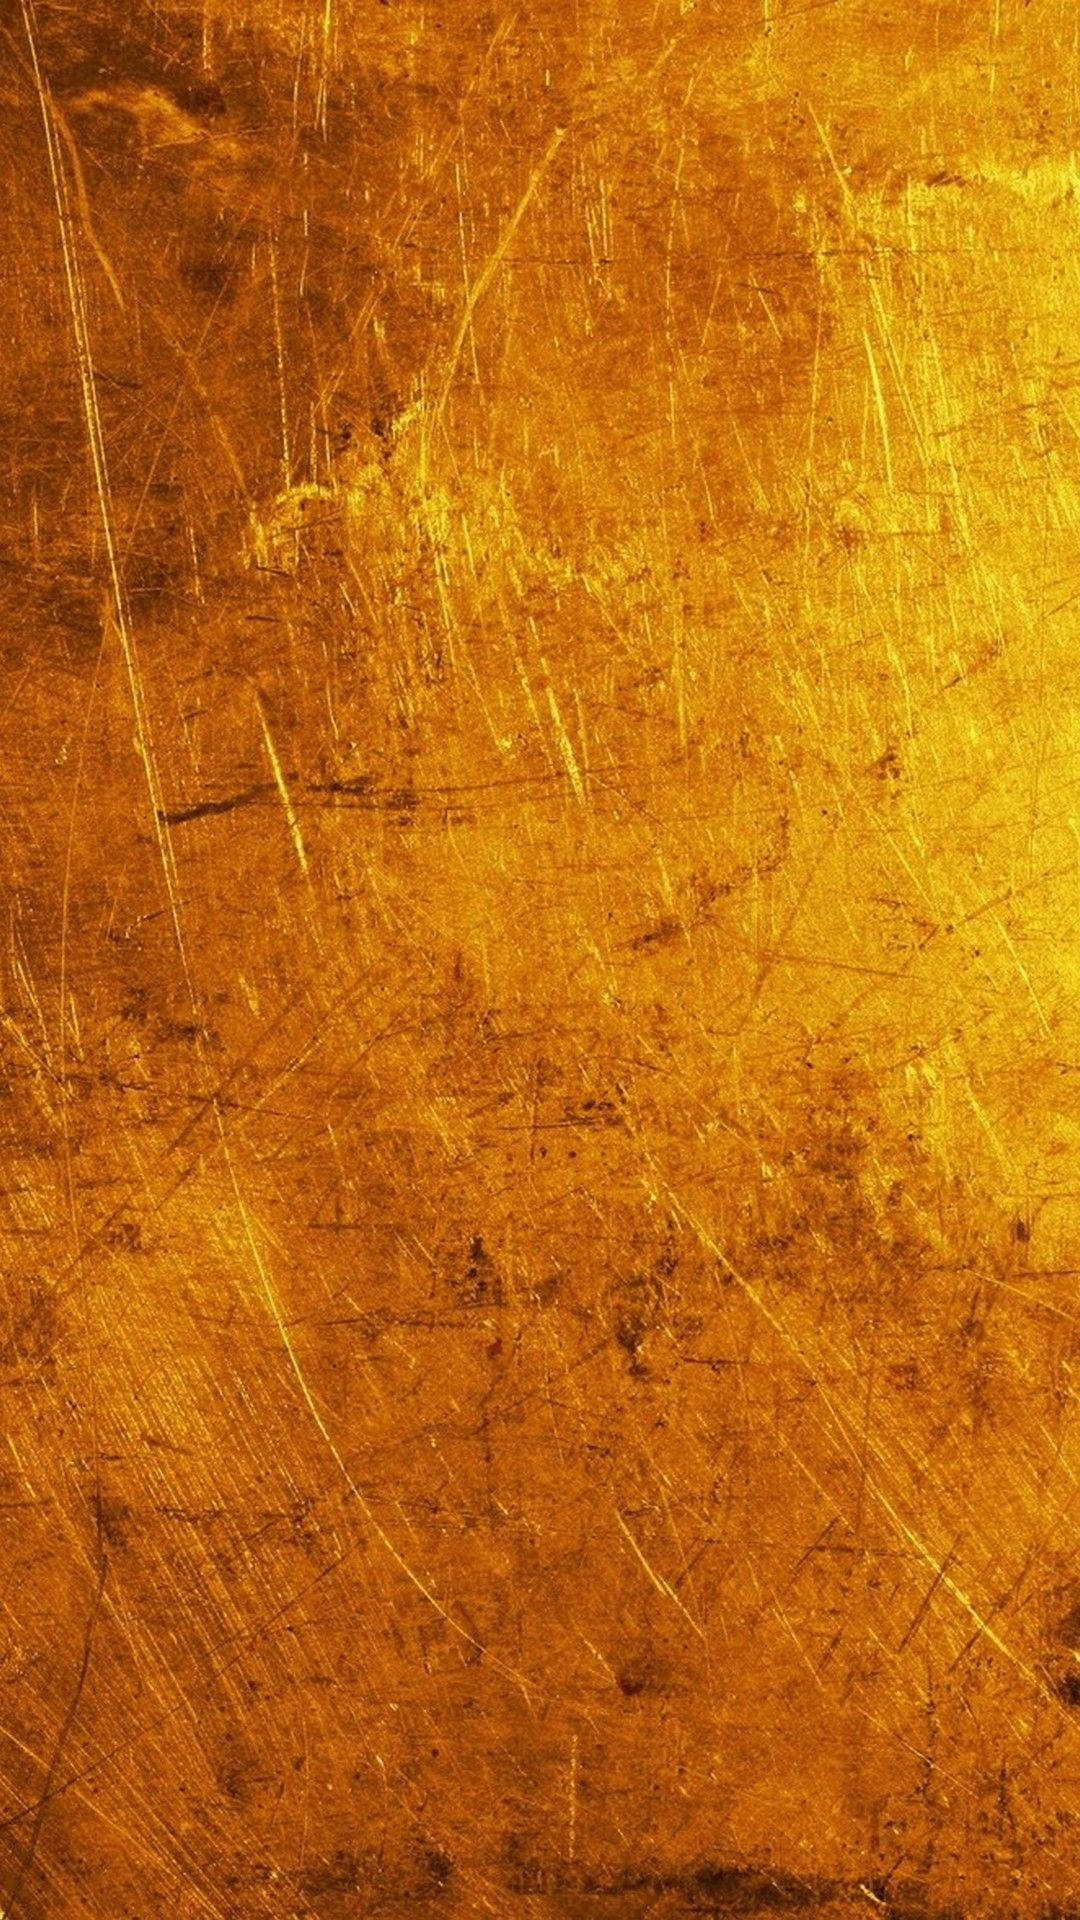 Download Plain Gold Surface With Scratches Wallpaper 